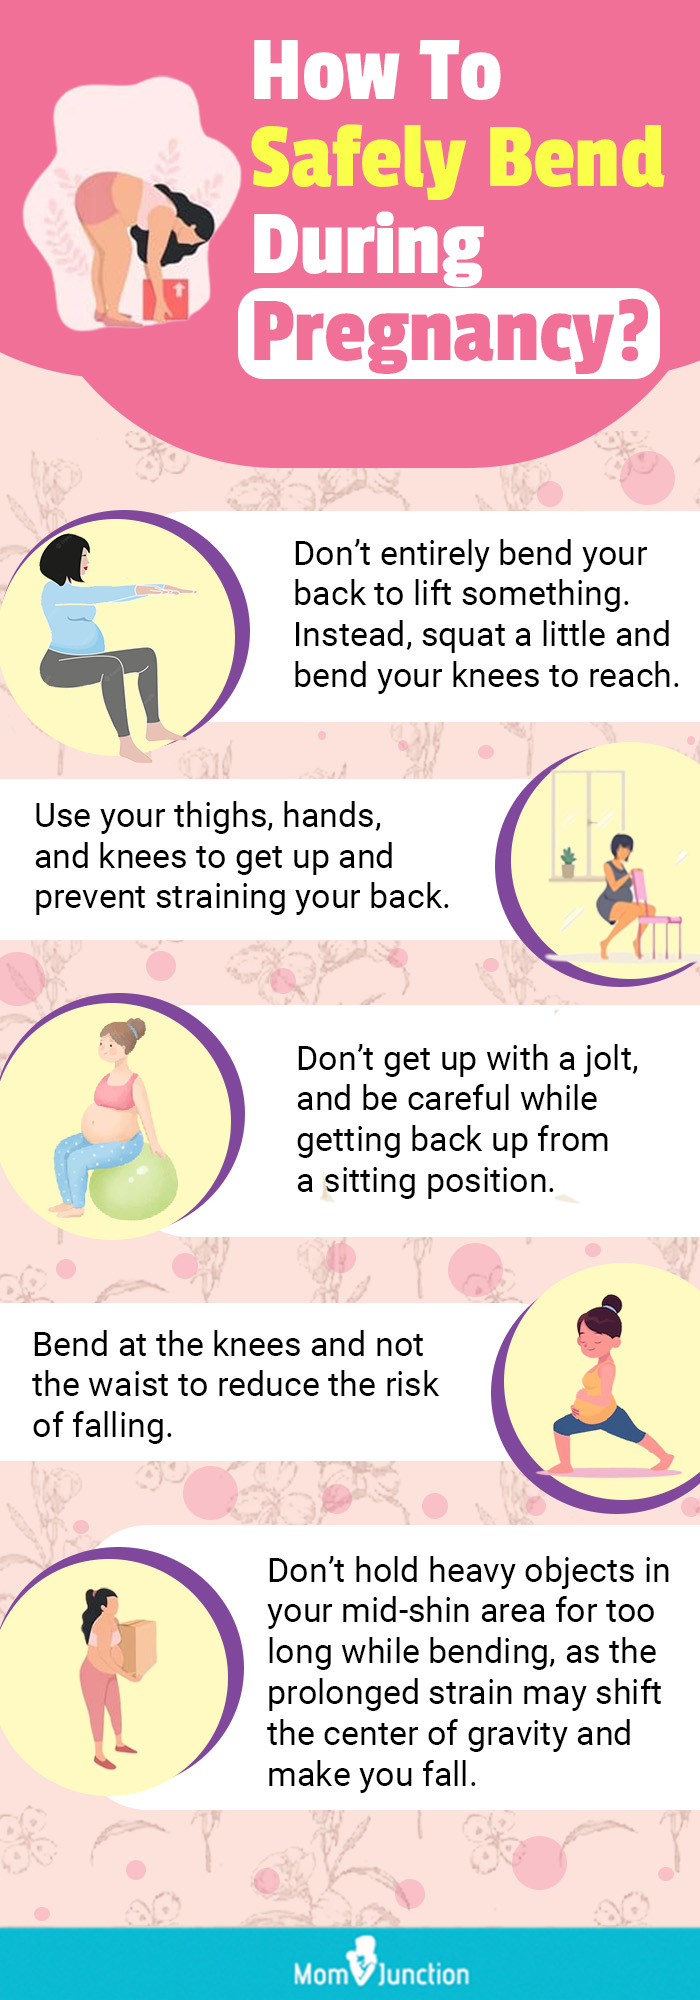 how to safely bend during pregnancy [infographic]